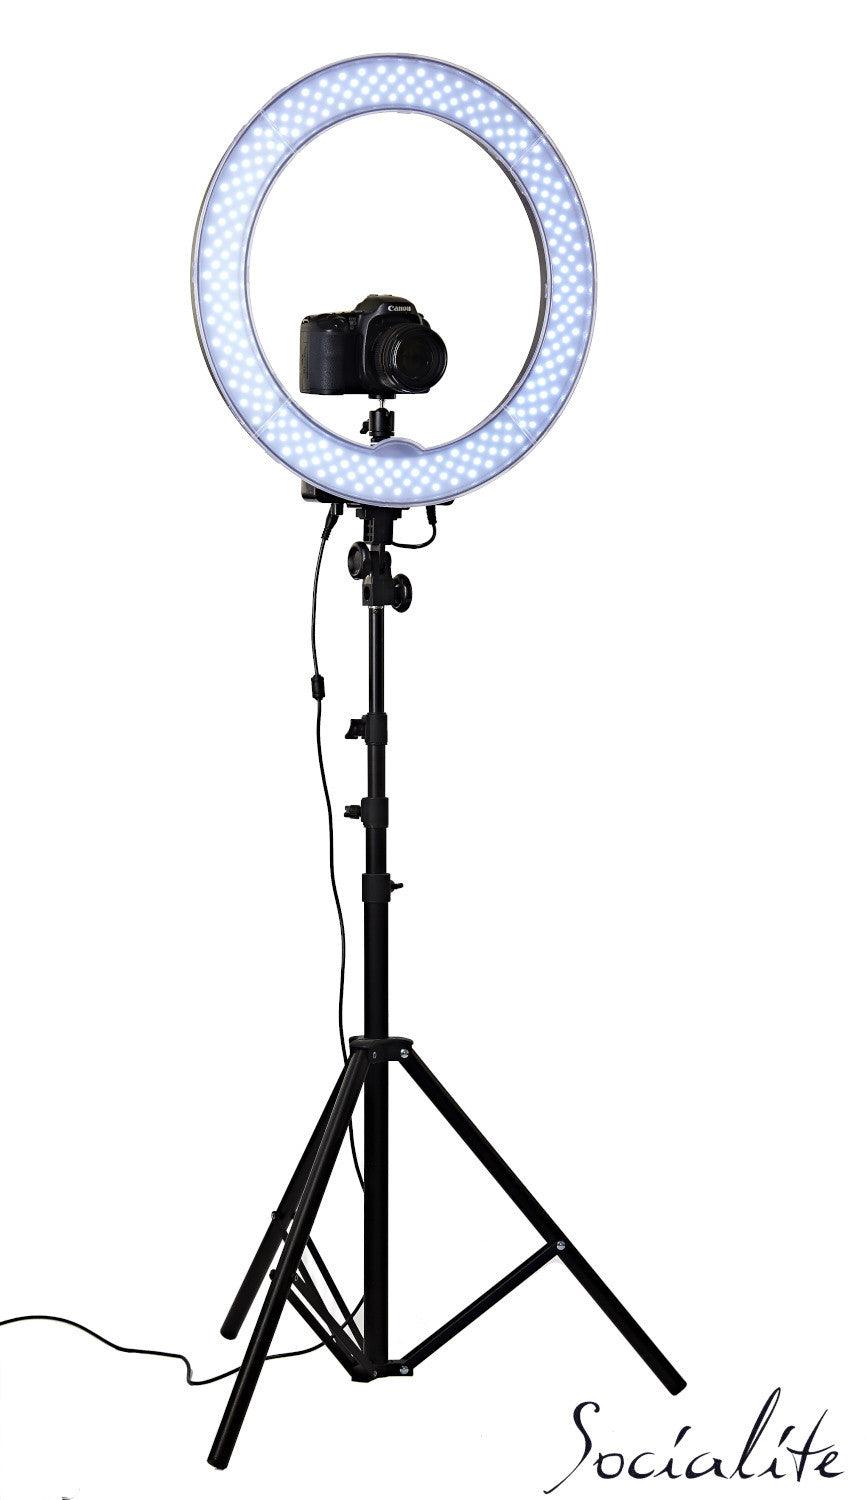 18 ring light with stand and DSLR camera mounted